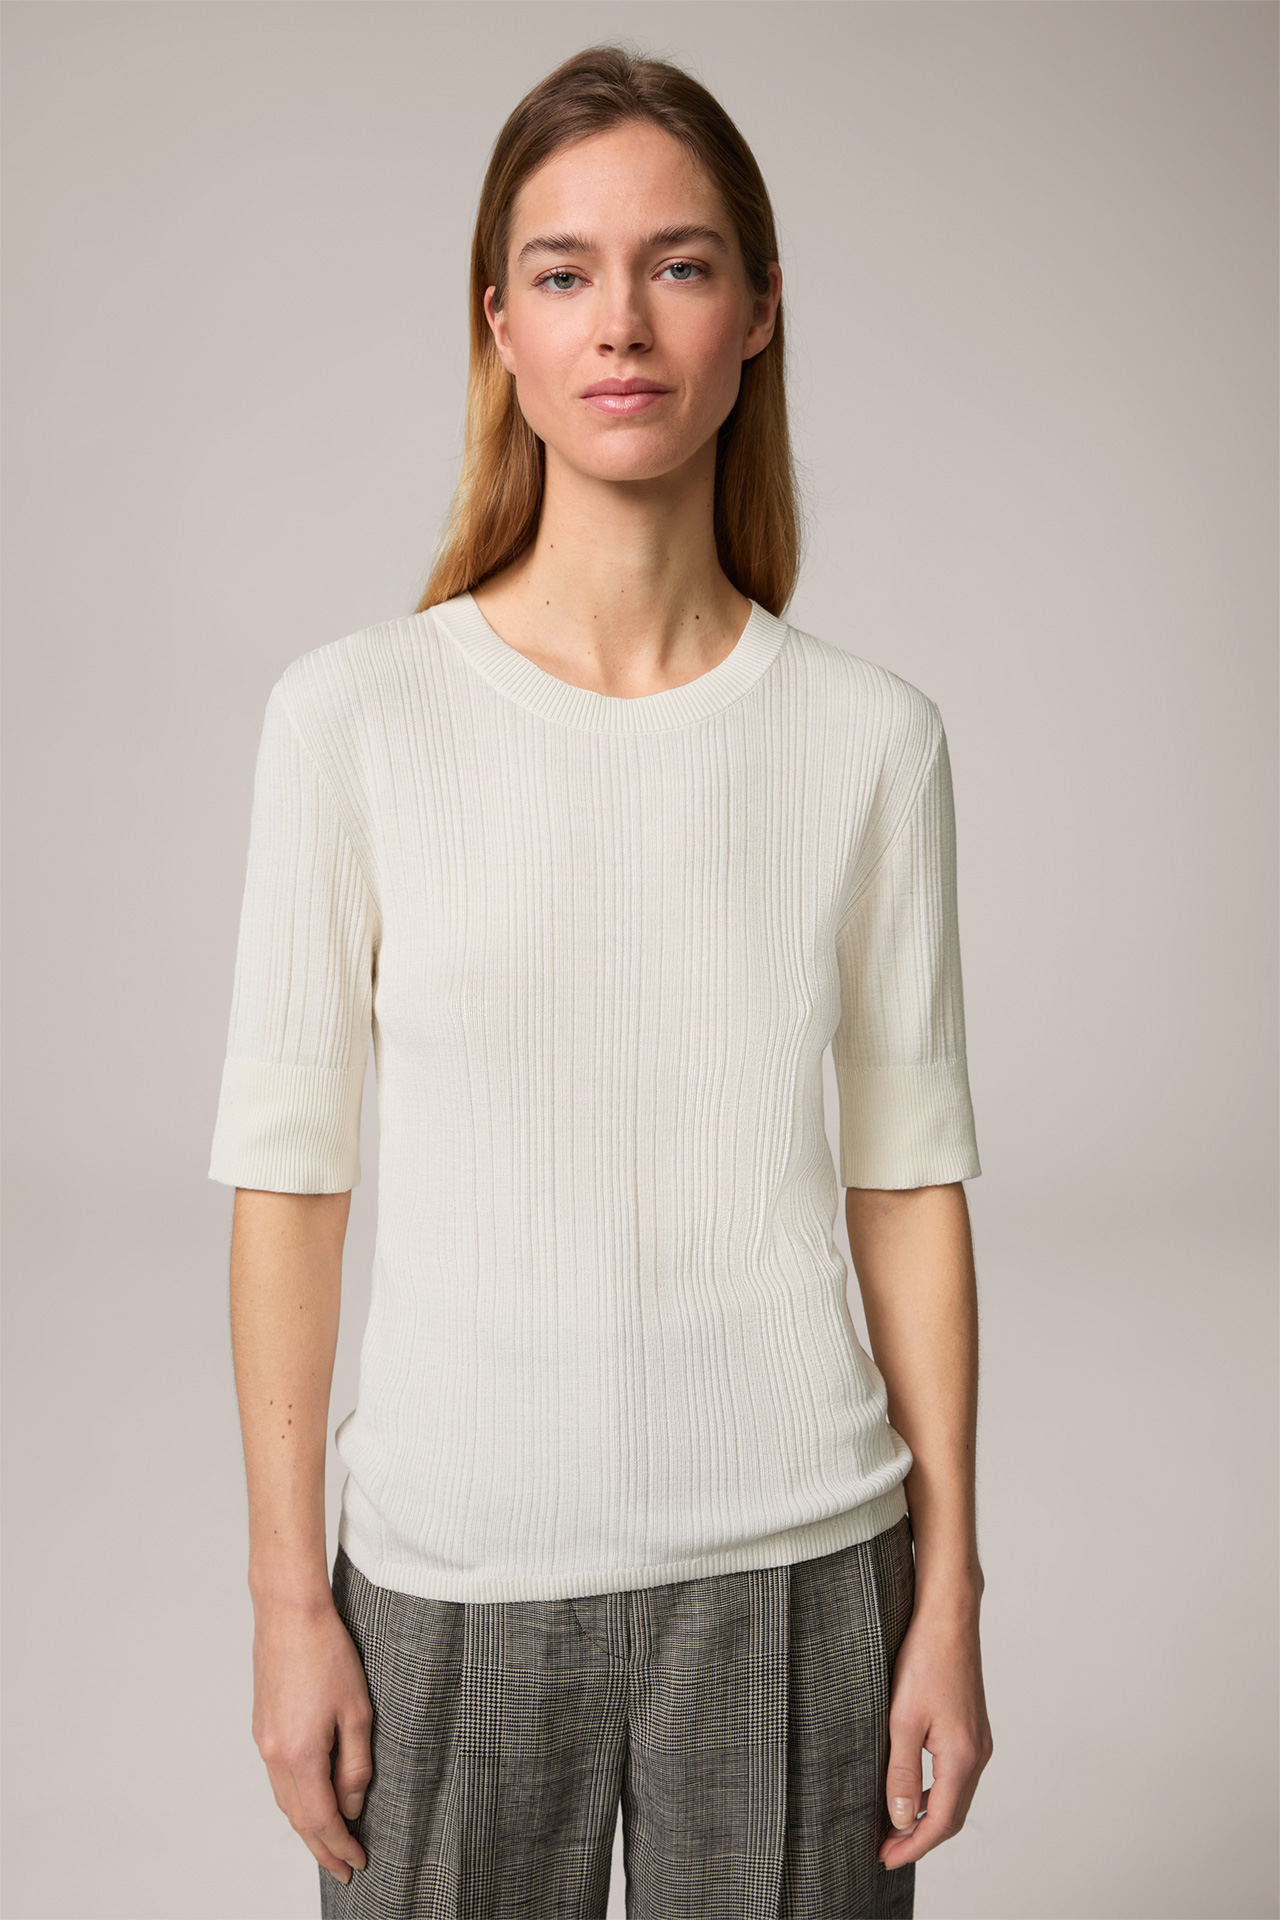 Silk Cotton Blend Ribbed Knit T-shirt in Cream